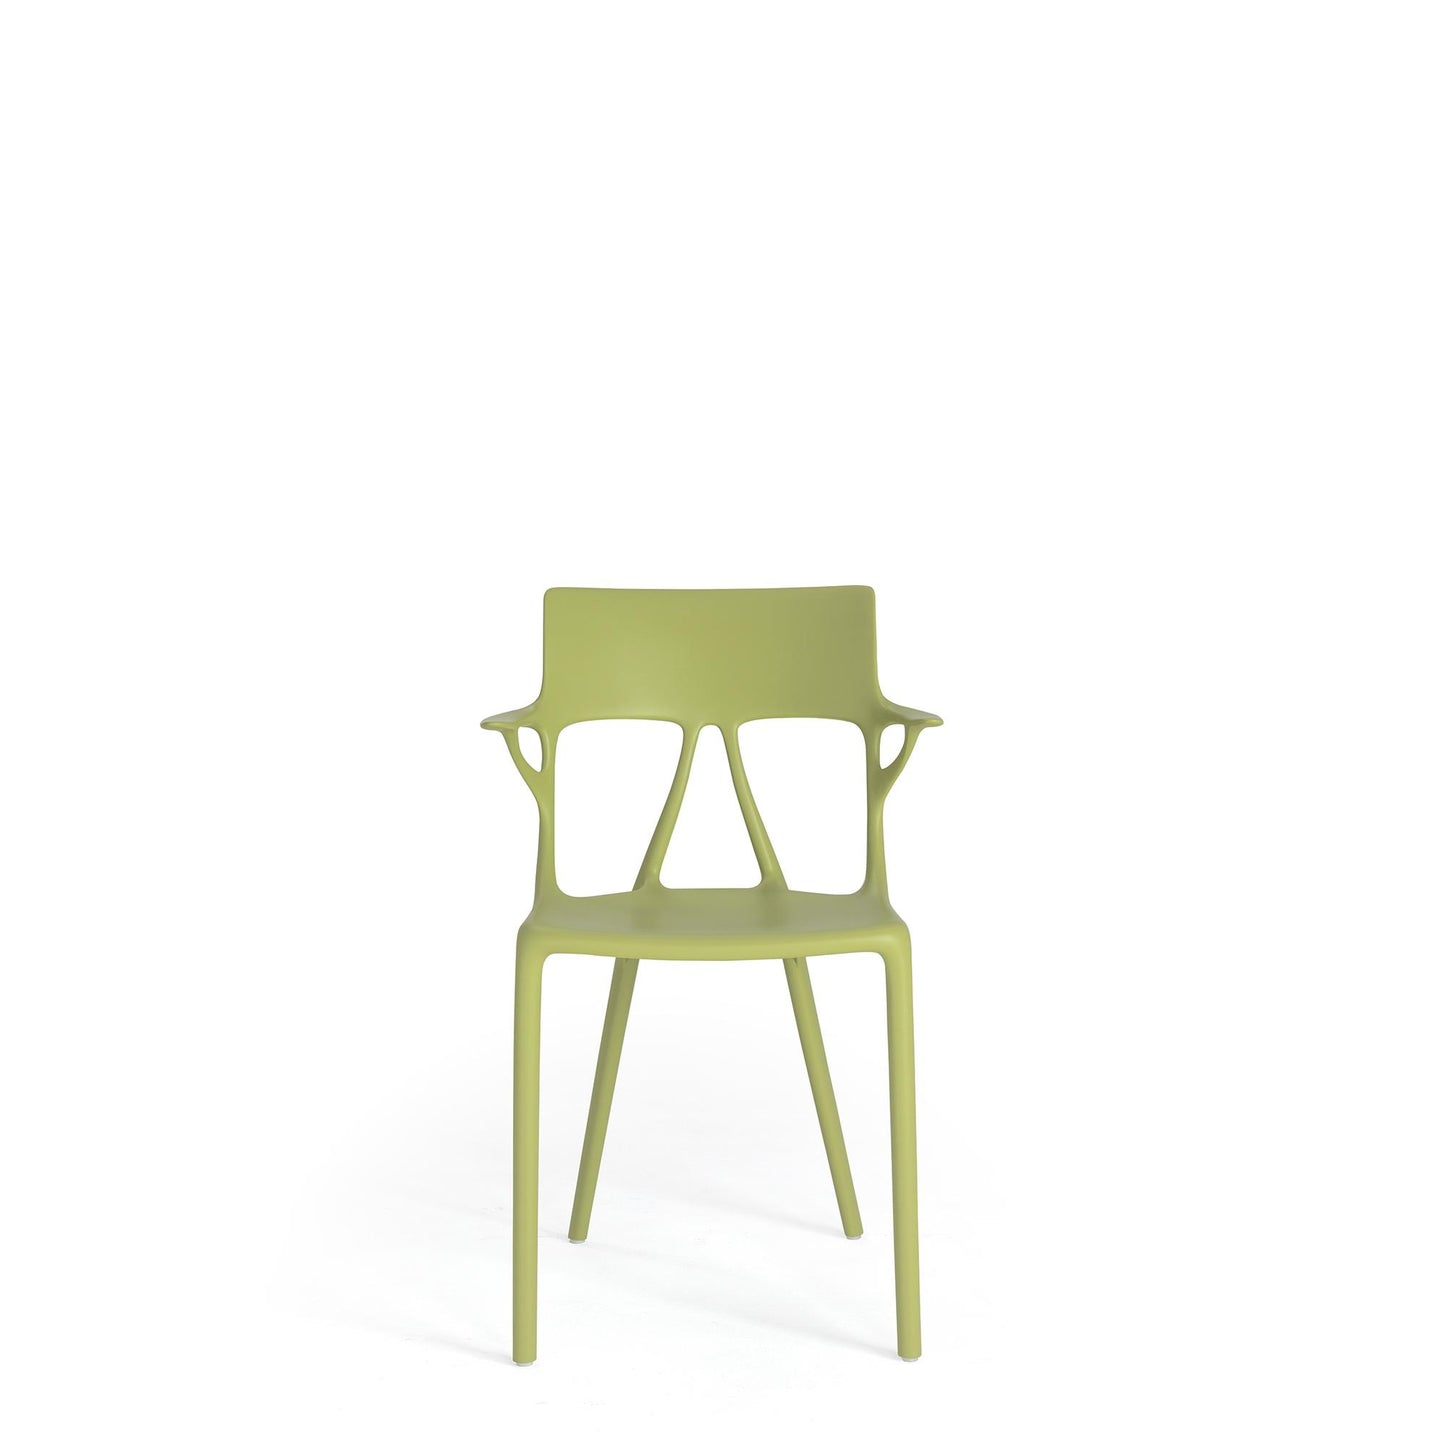 AI Dining Chair by Kartell #Green